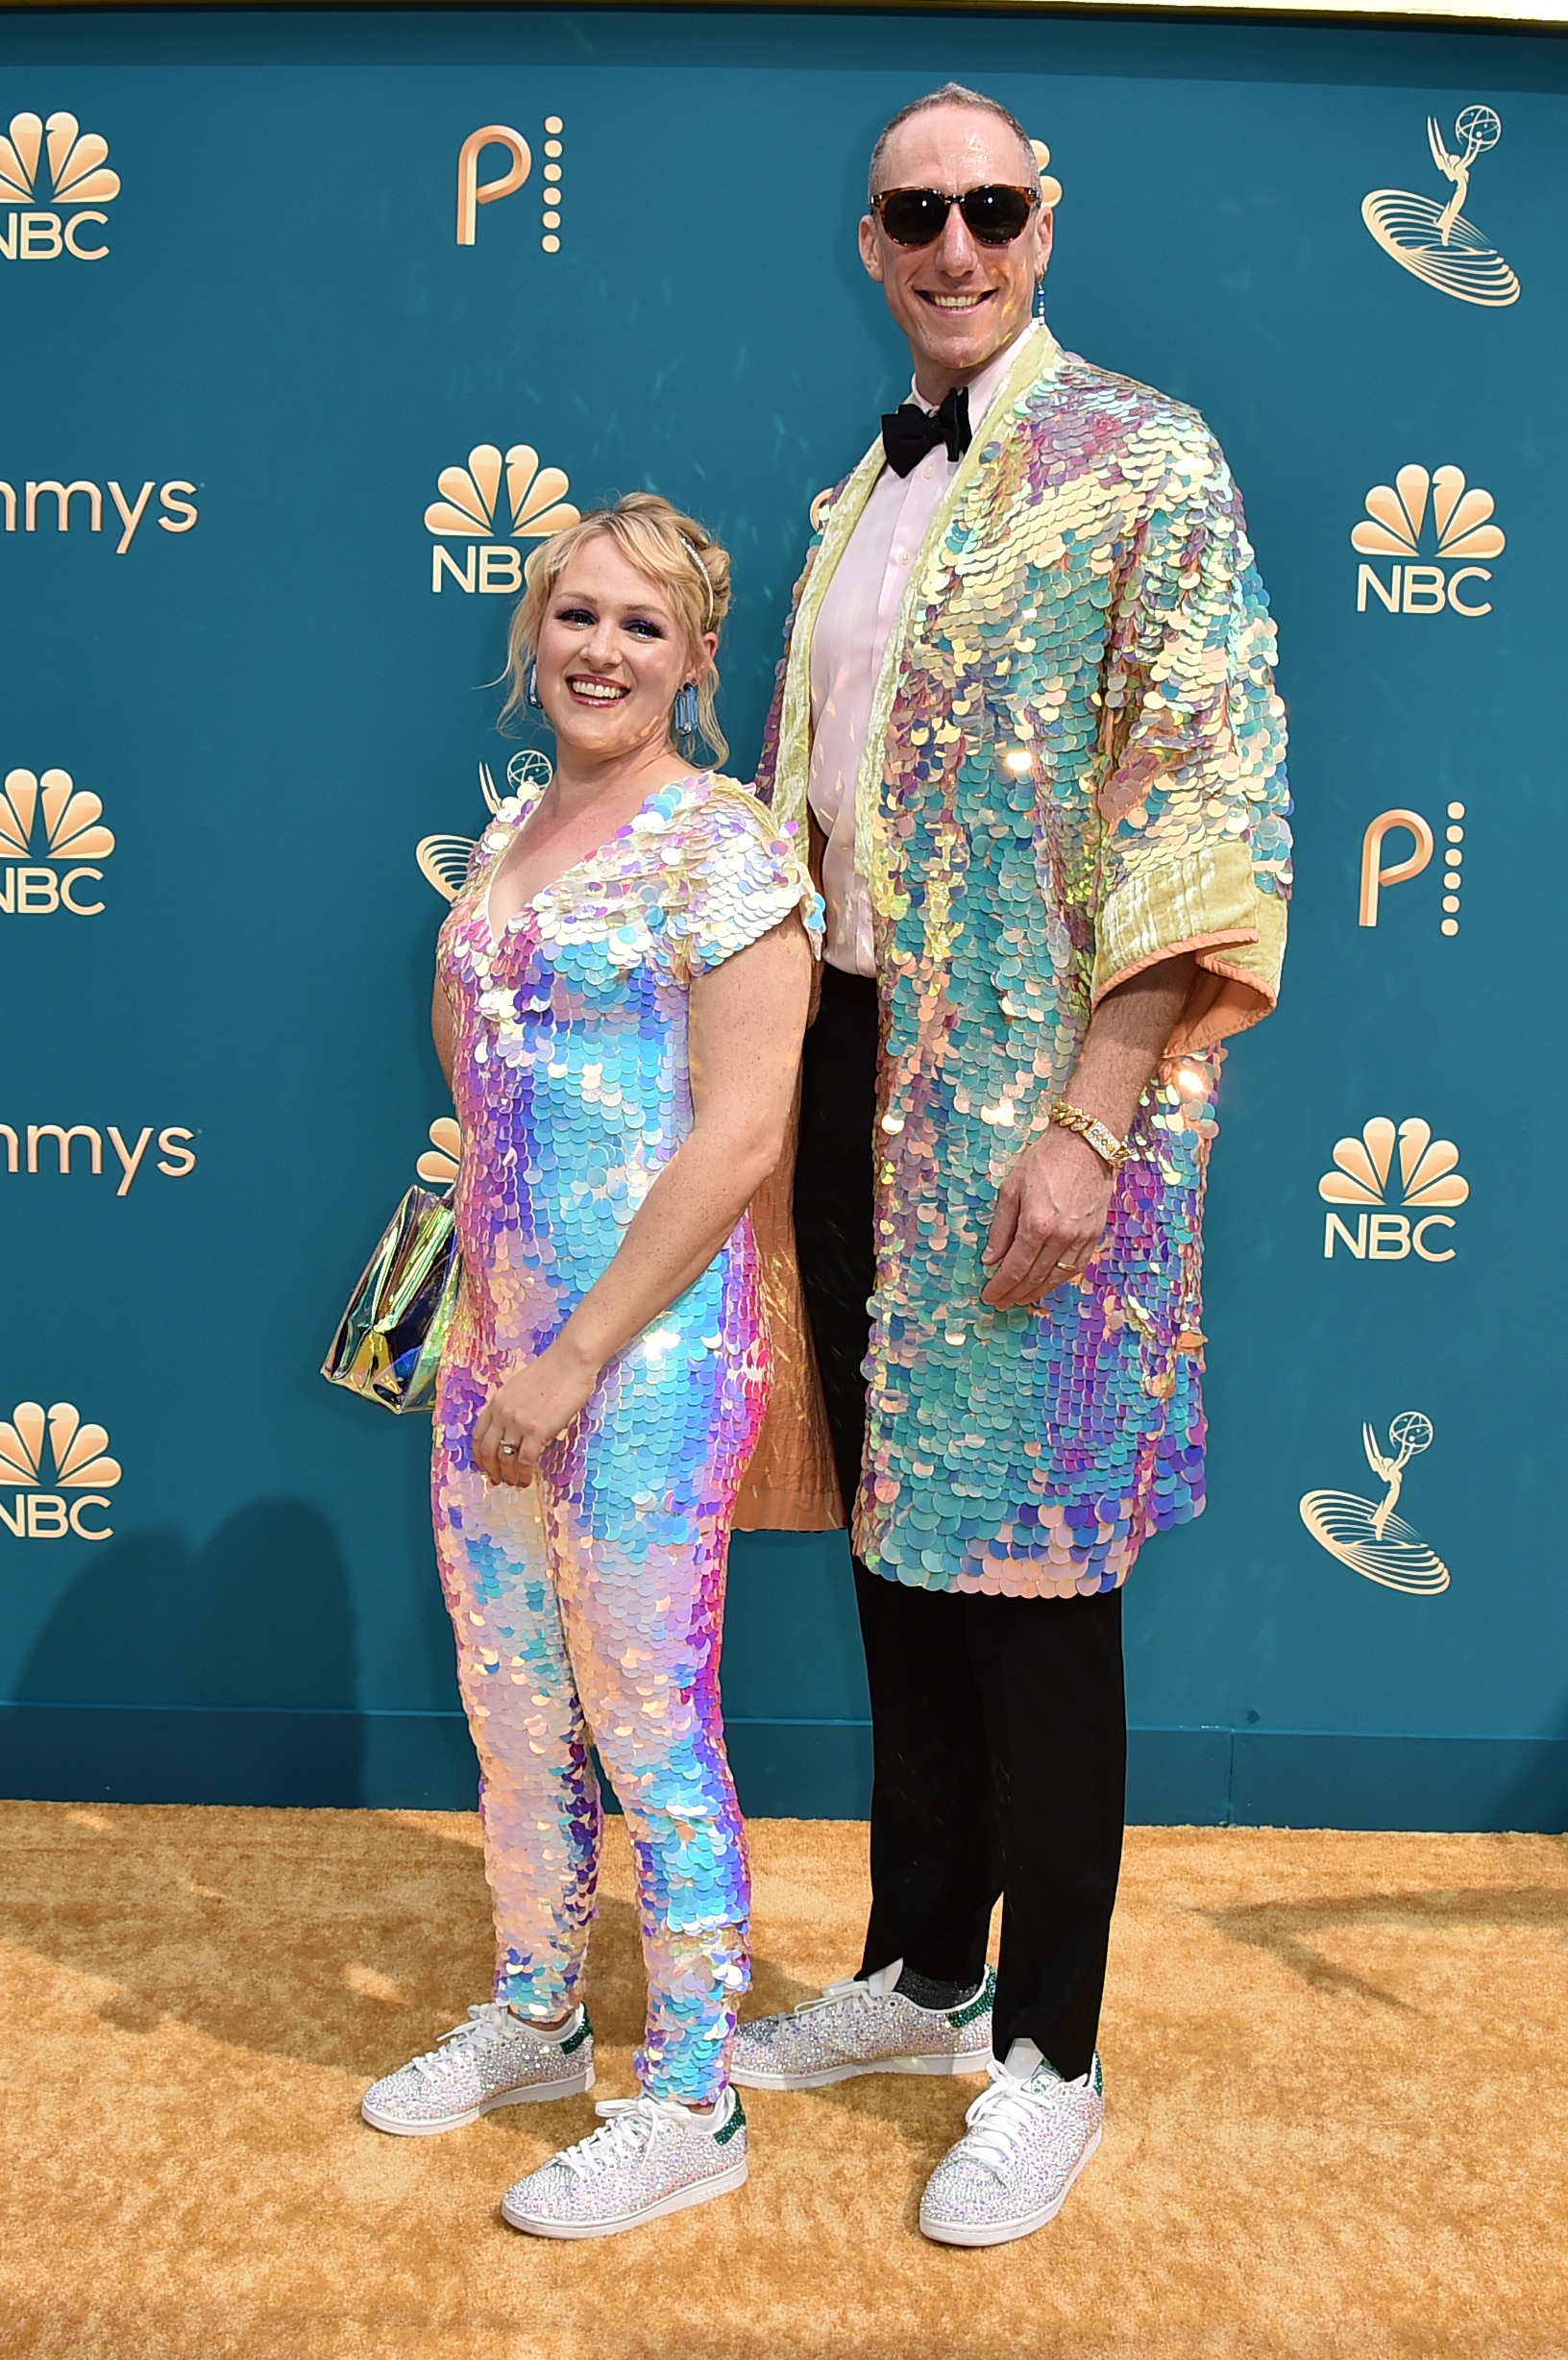 Ariel Dumas and Andrew Ecker wearing sequined suits and shimmery sneakers